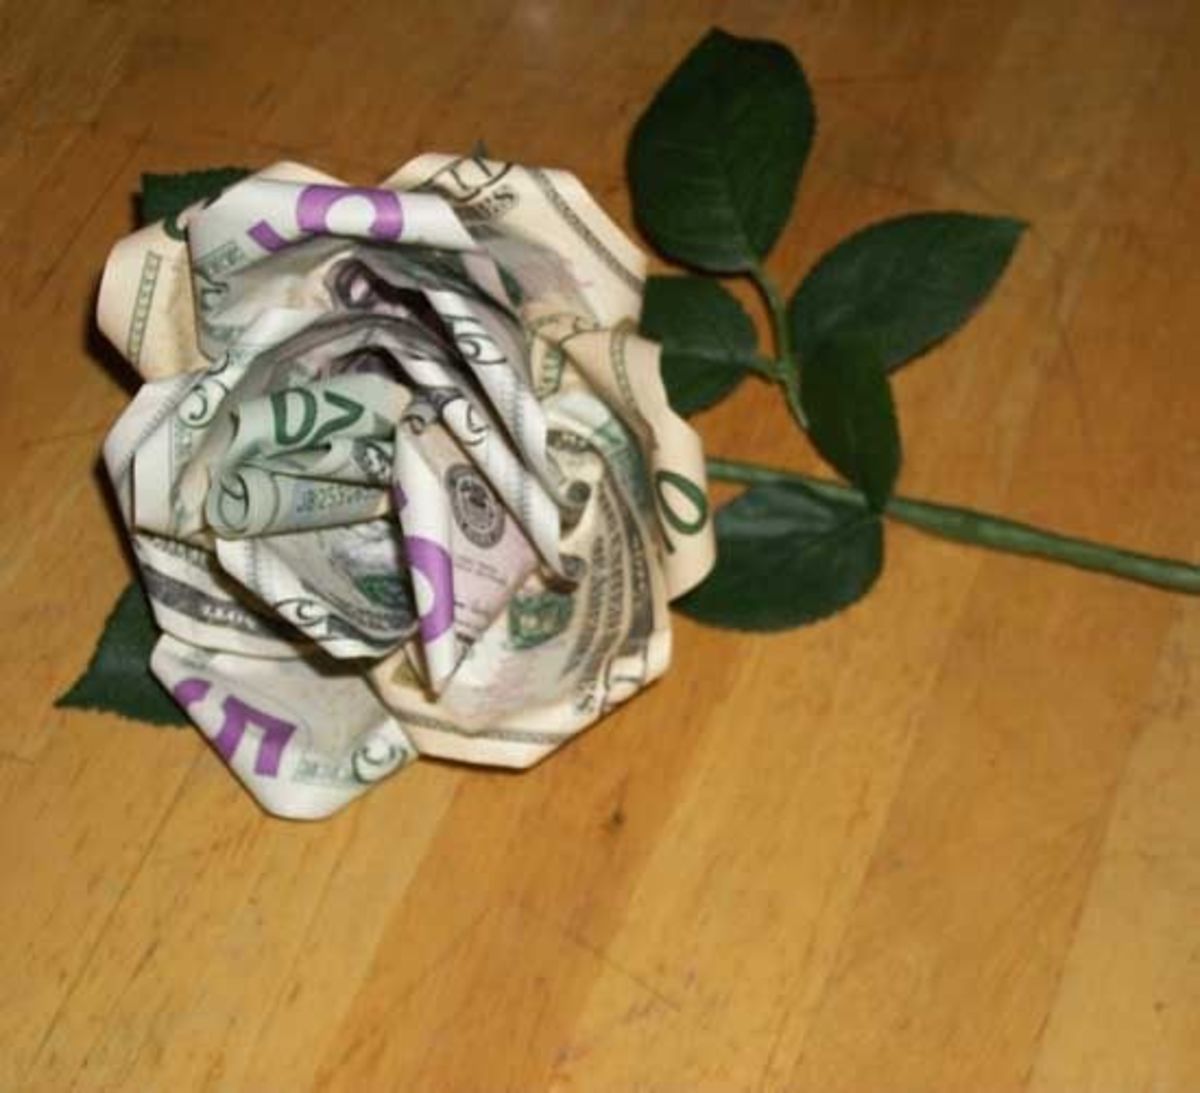 I made this bloom with assorted denominations of bills for a graduation gift.